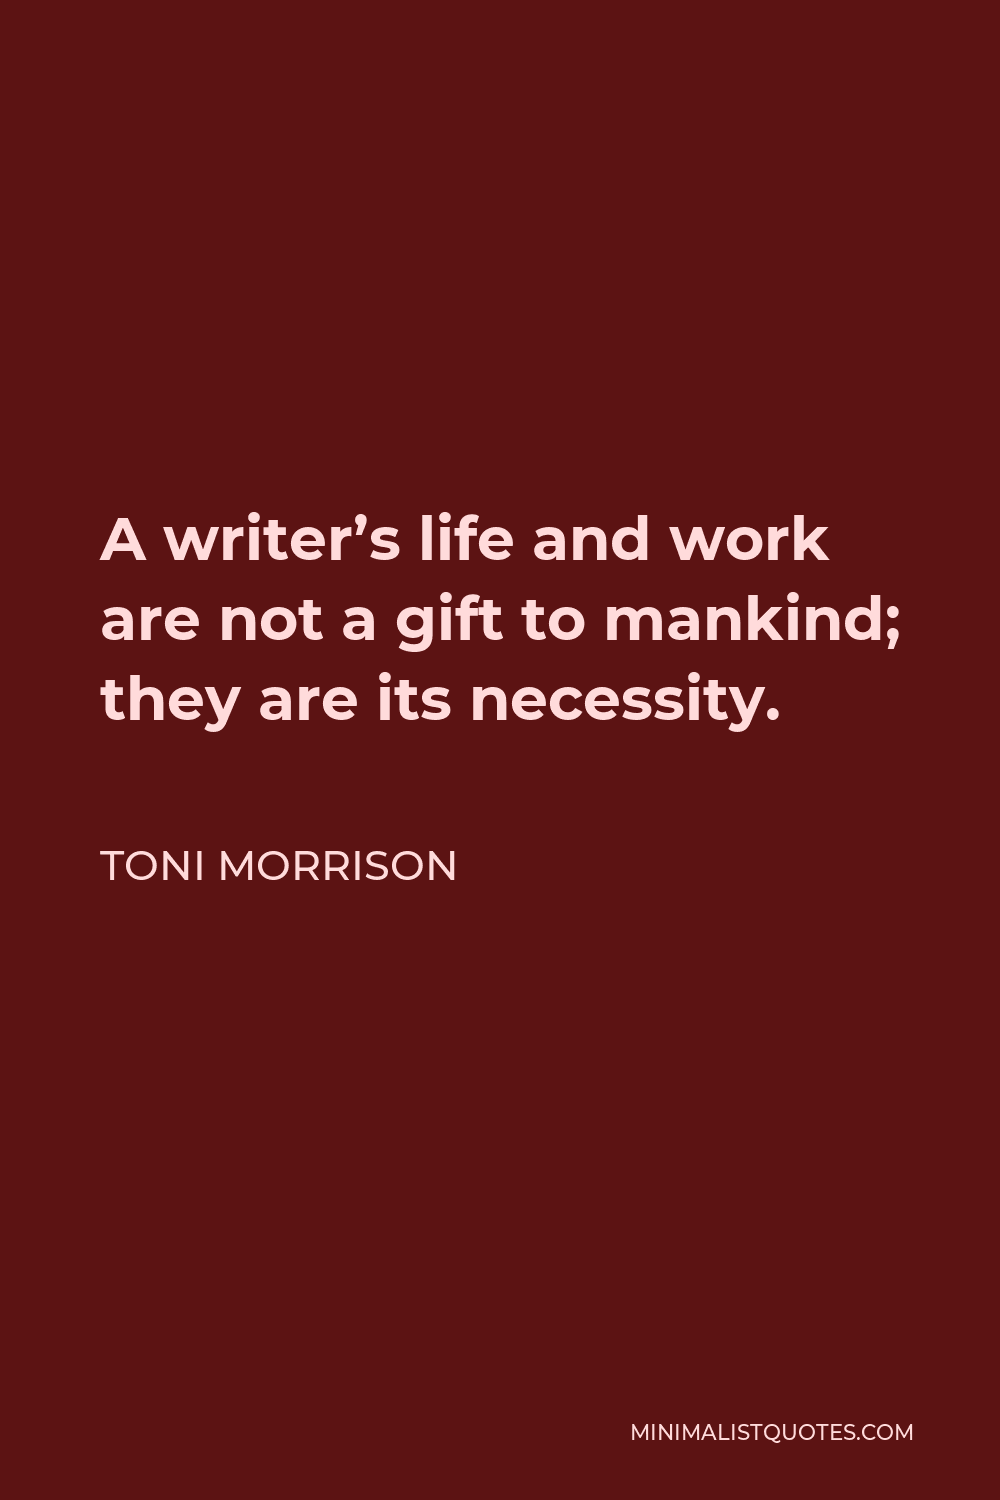 Toni Morrison Quote - A writer’s life and work are not a gift to mankind; they are its necessity.